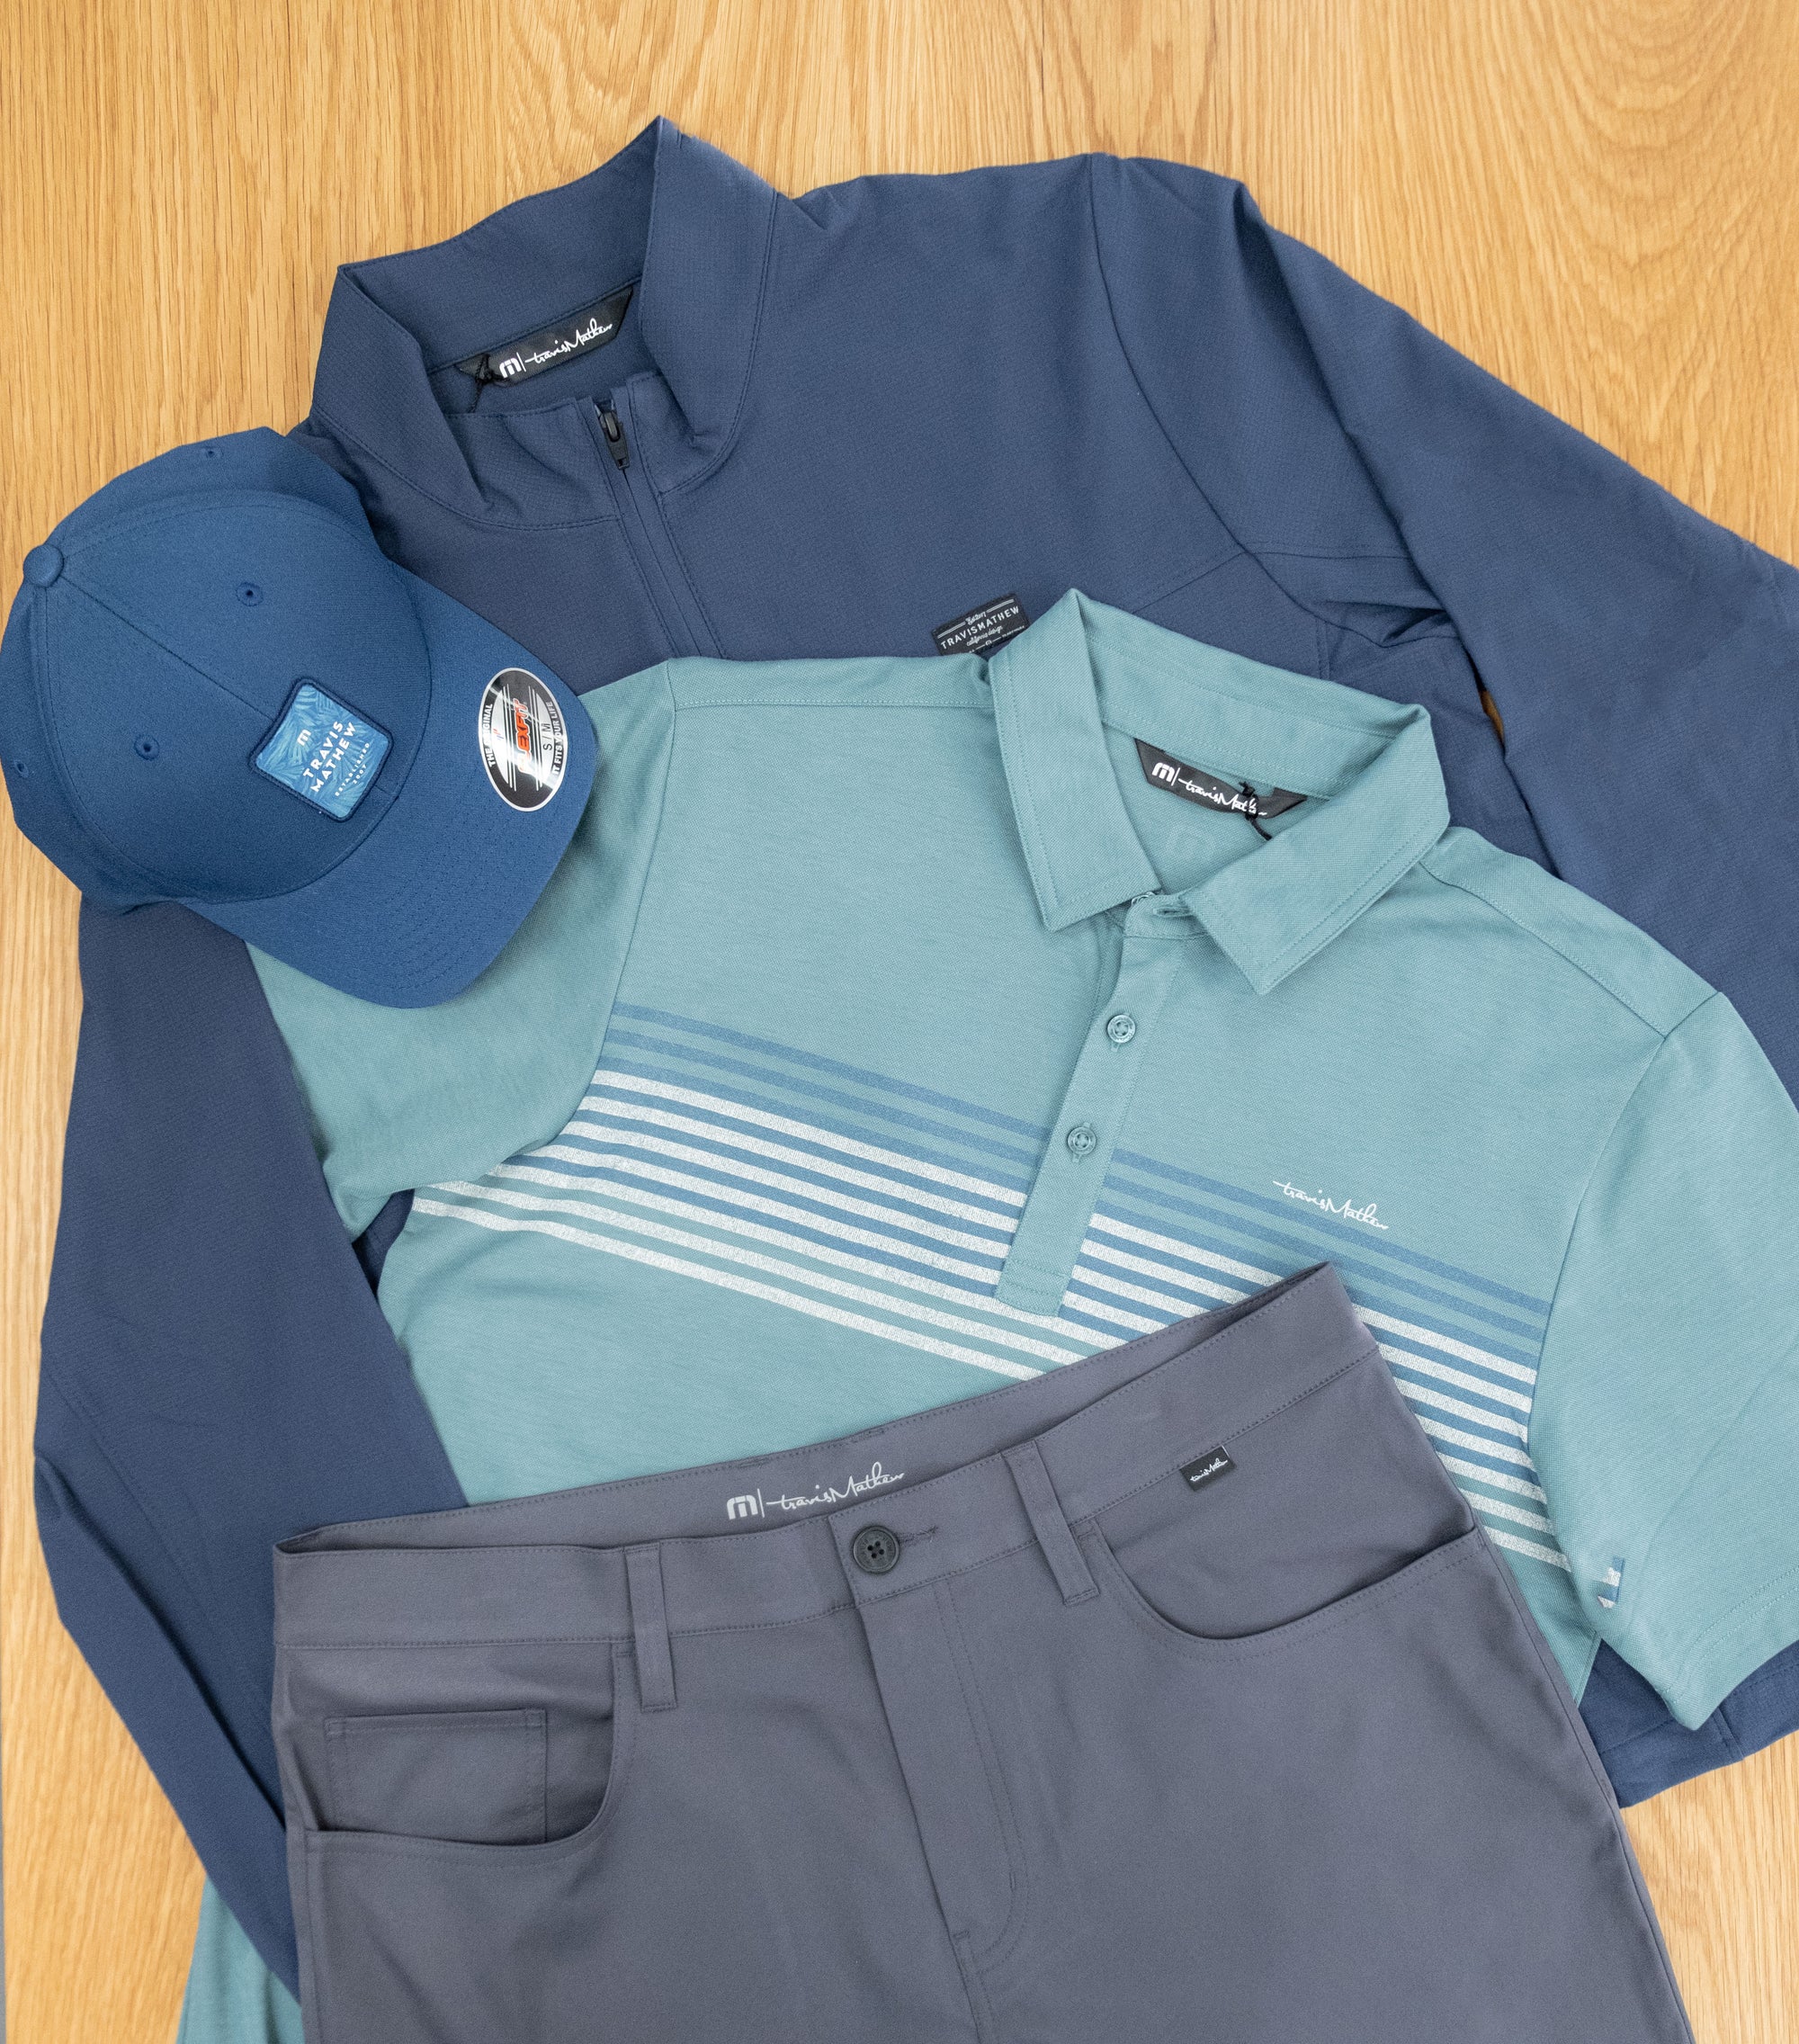 What to Wear Golfing - New Looks